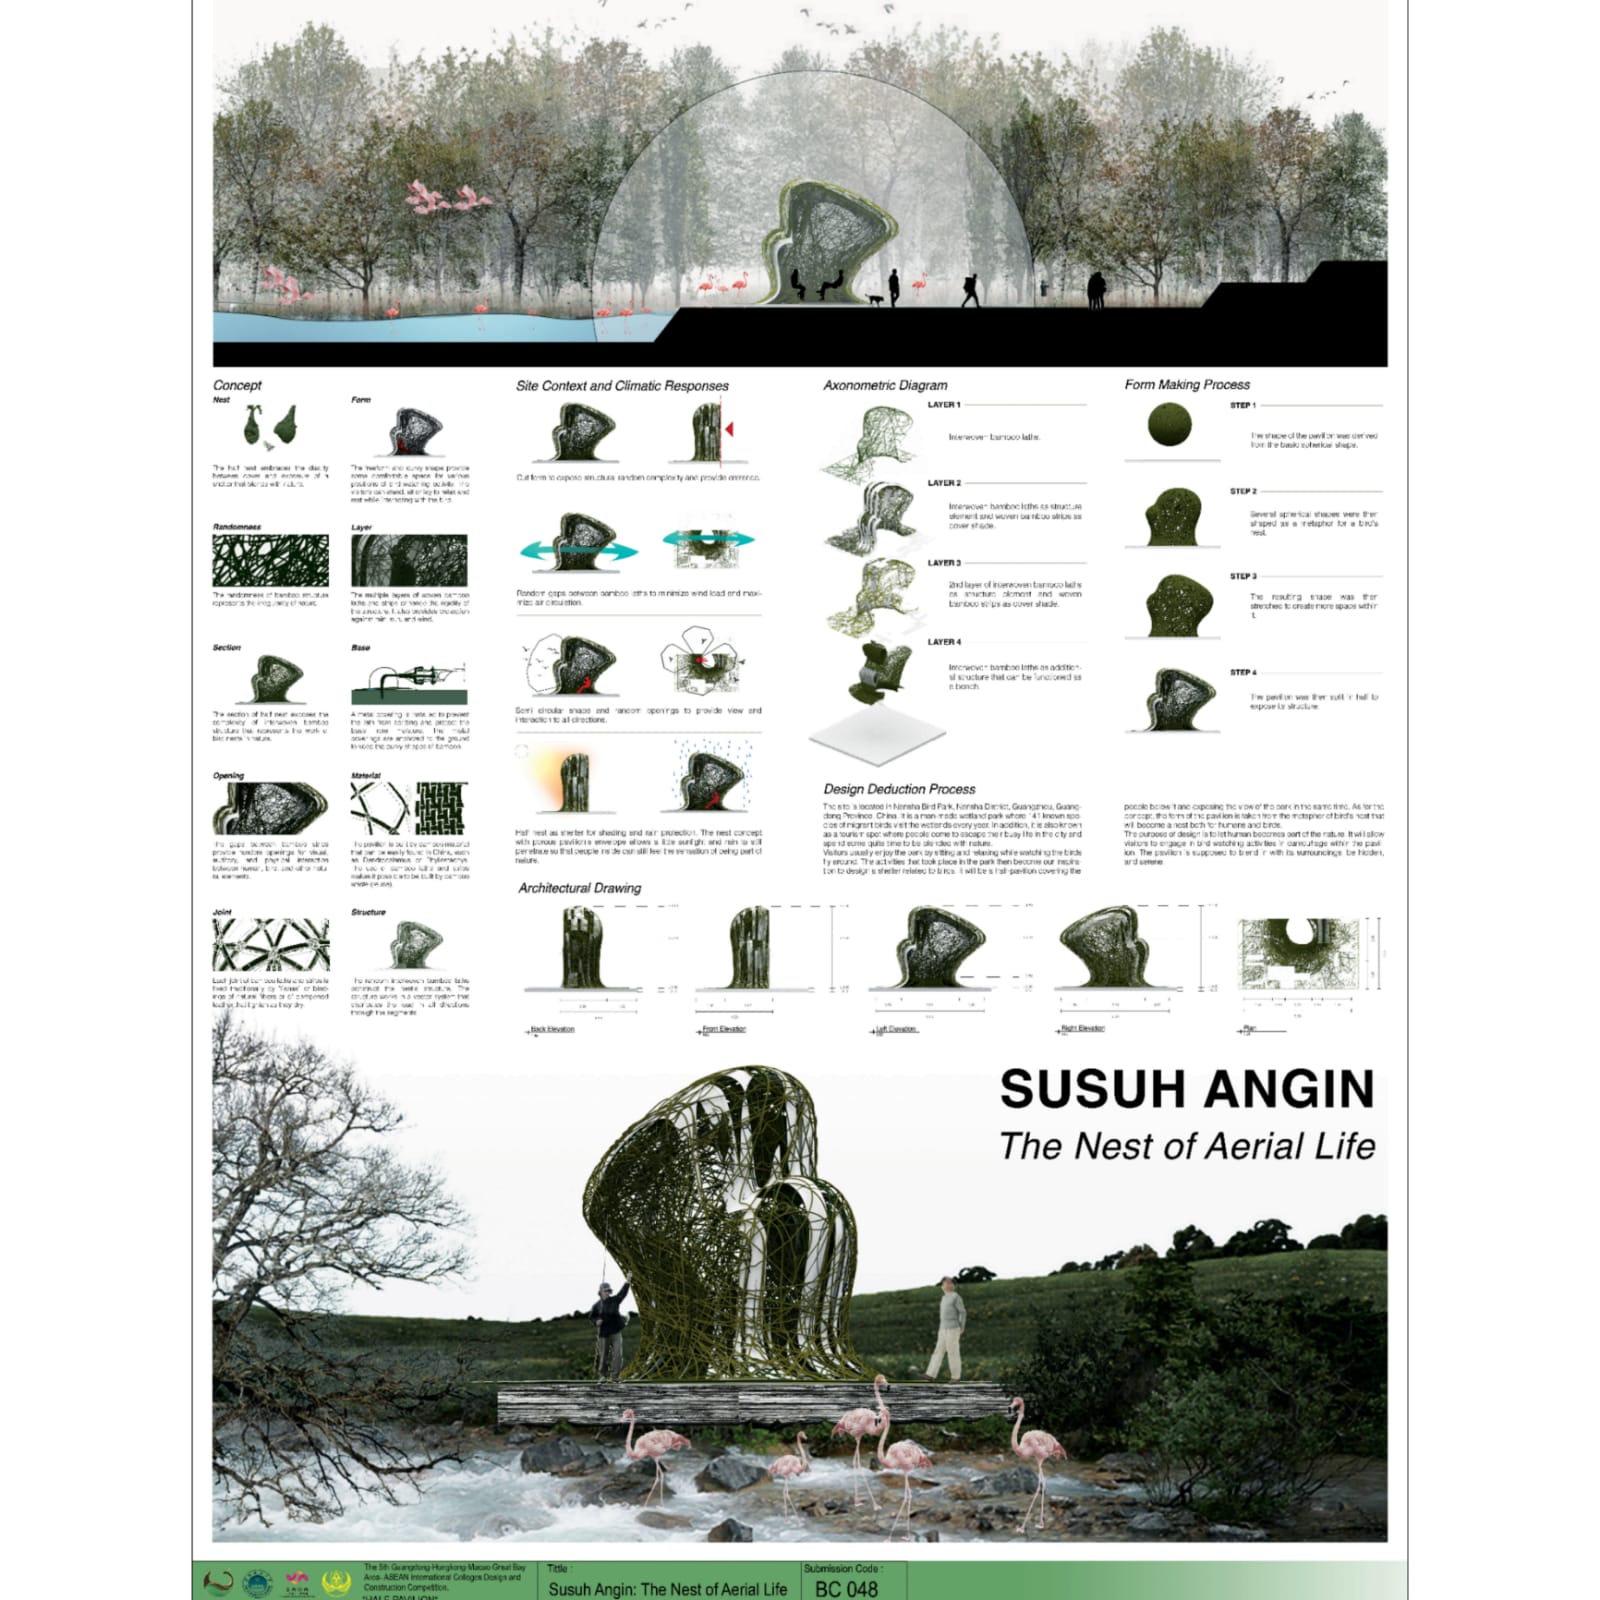 Poster for the detailed construction of Susuh Angin designed by the ITS Narantaka Team